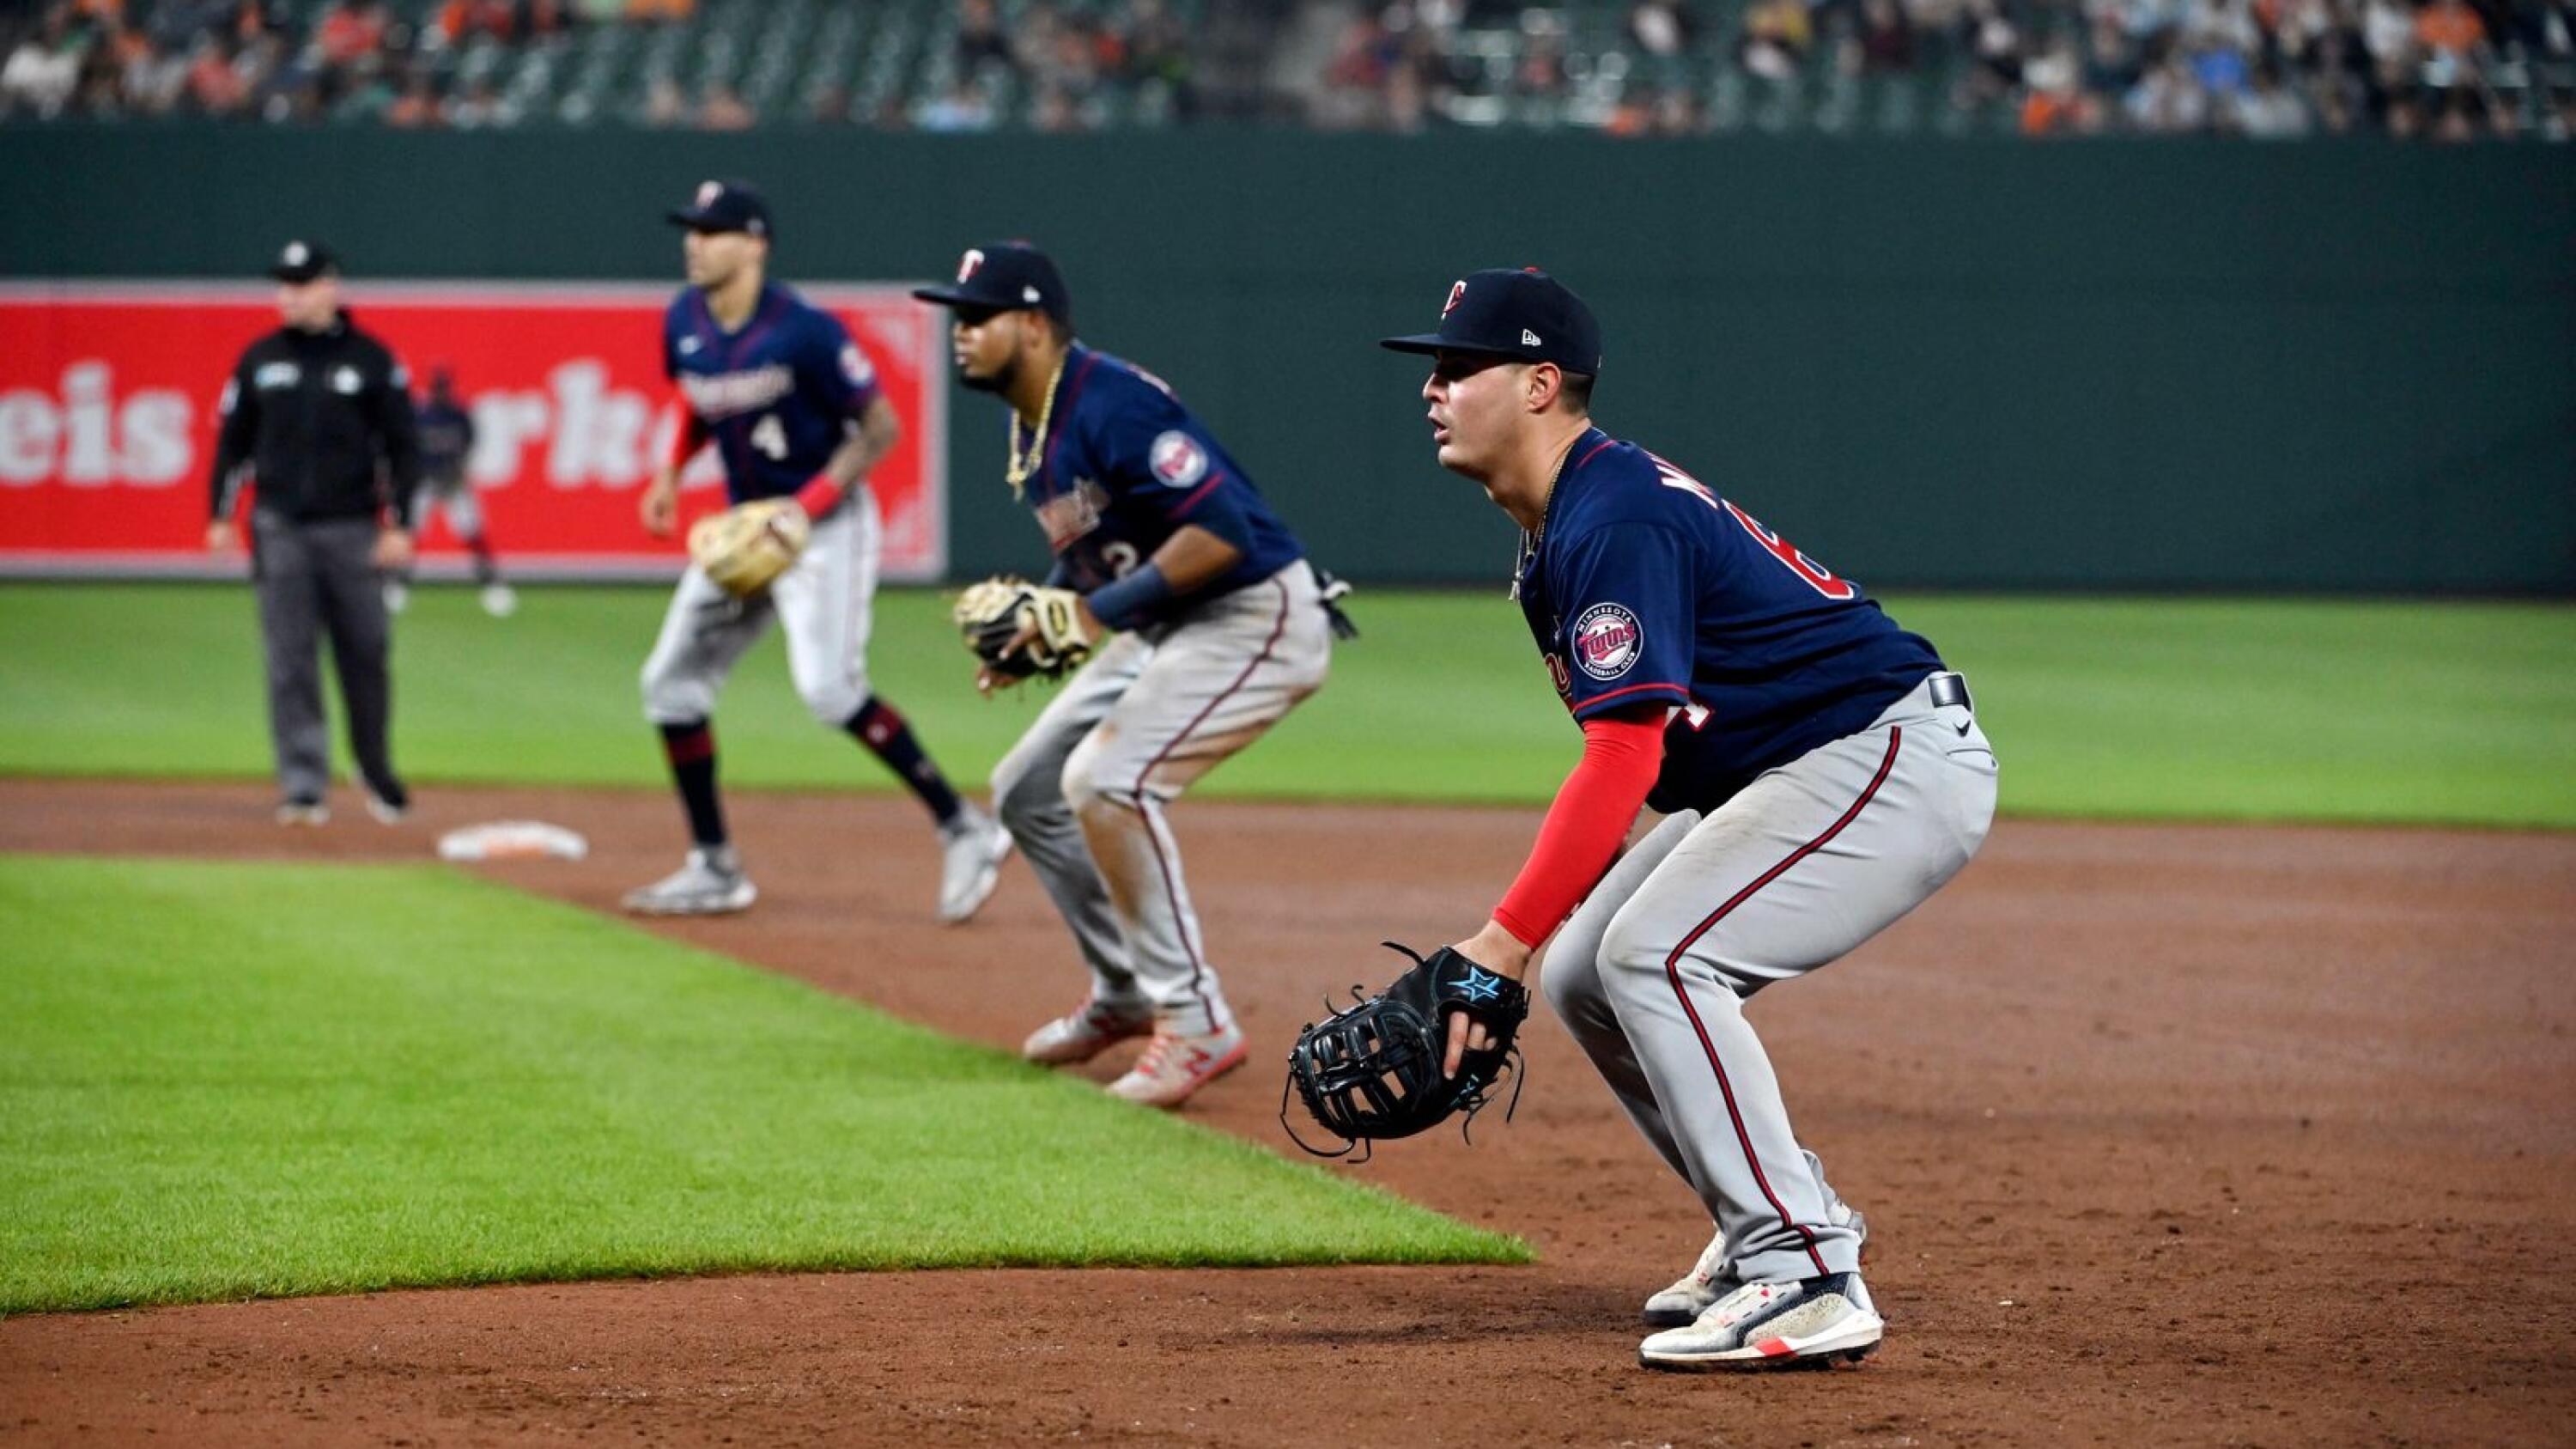 Major league teams searching for advantages with new rules